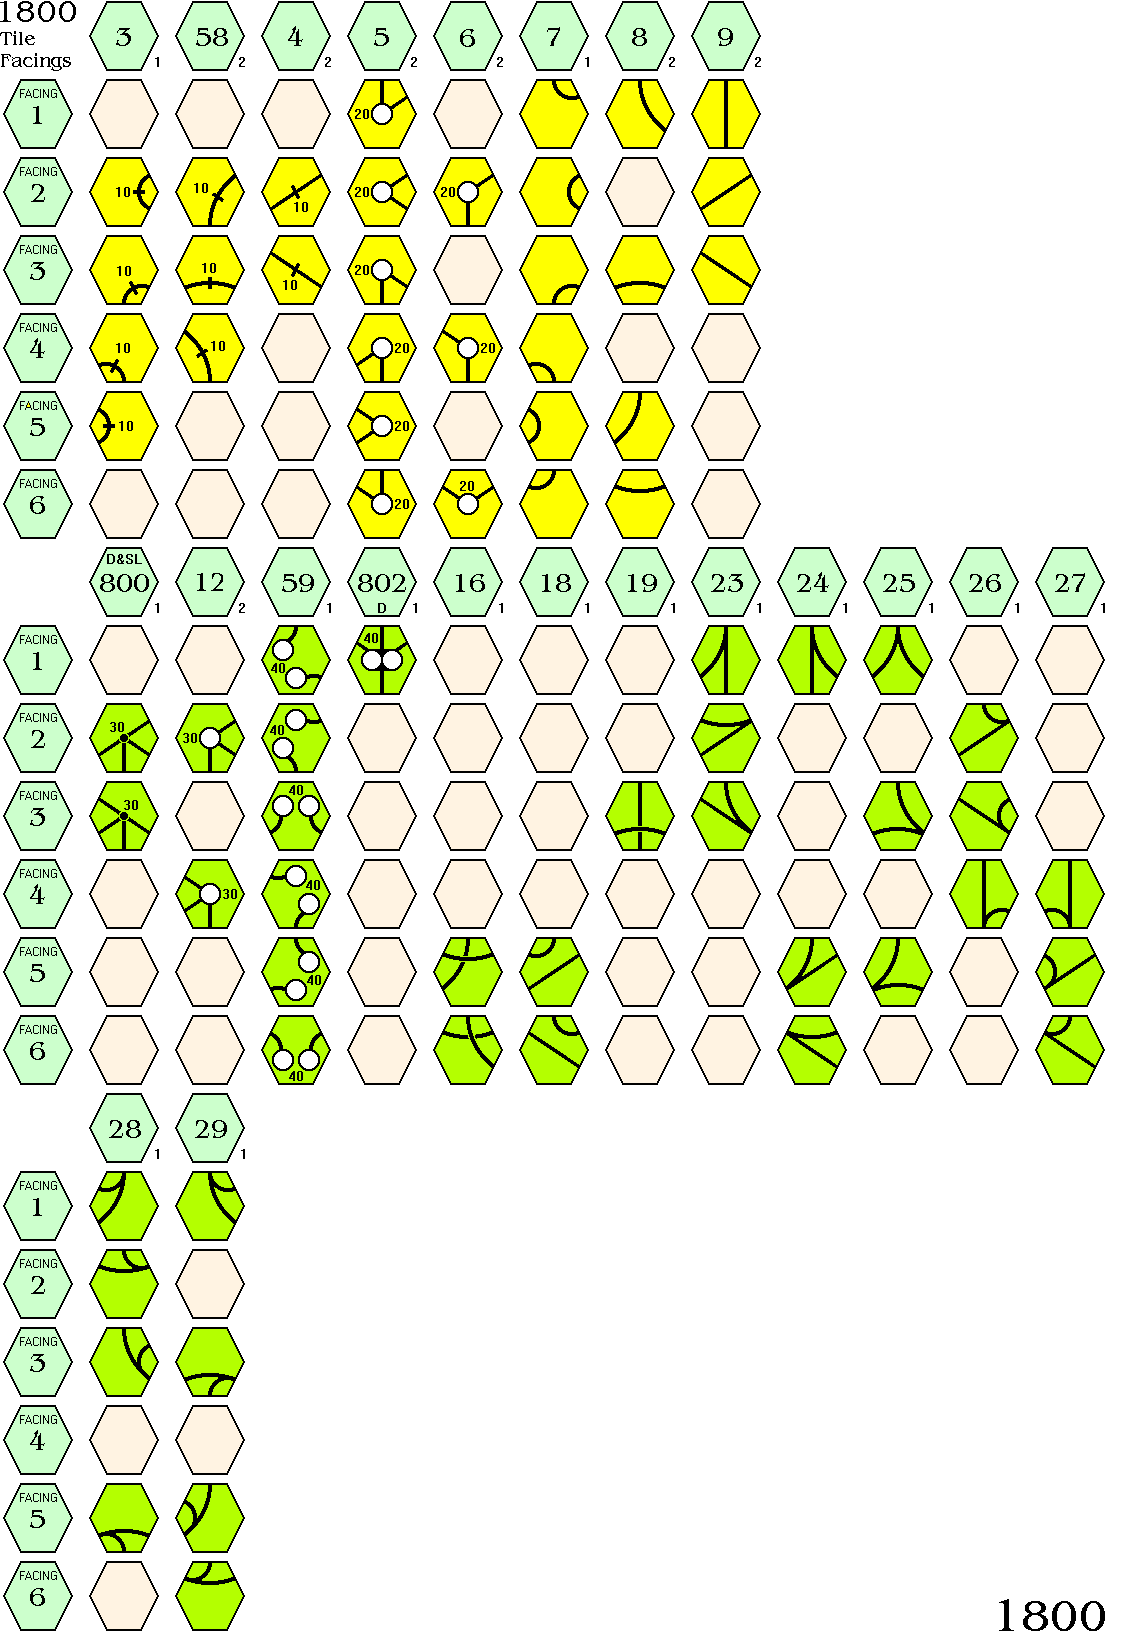 1800 (2 players) tile sheet - 1 of 2 - click to view the tile sheet on its own